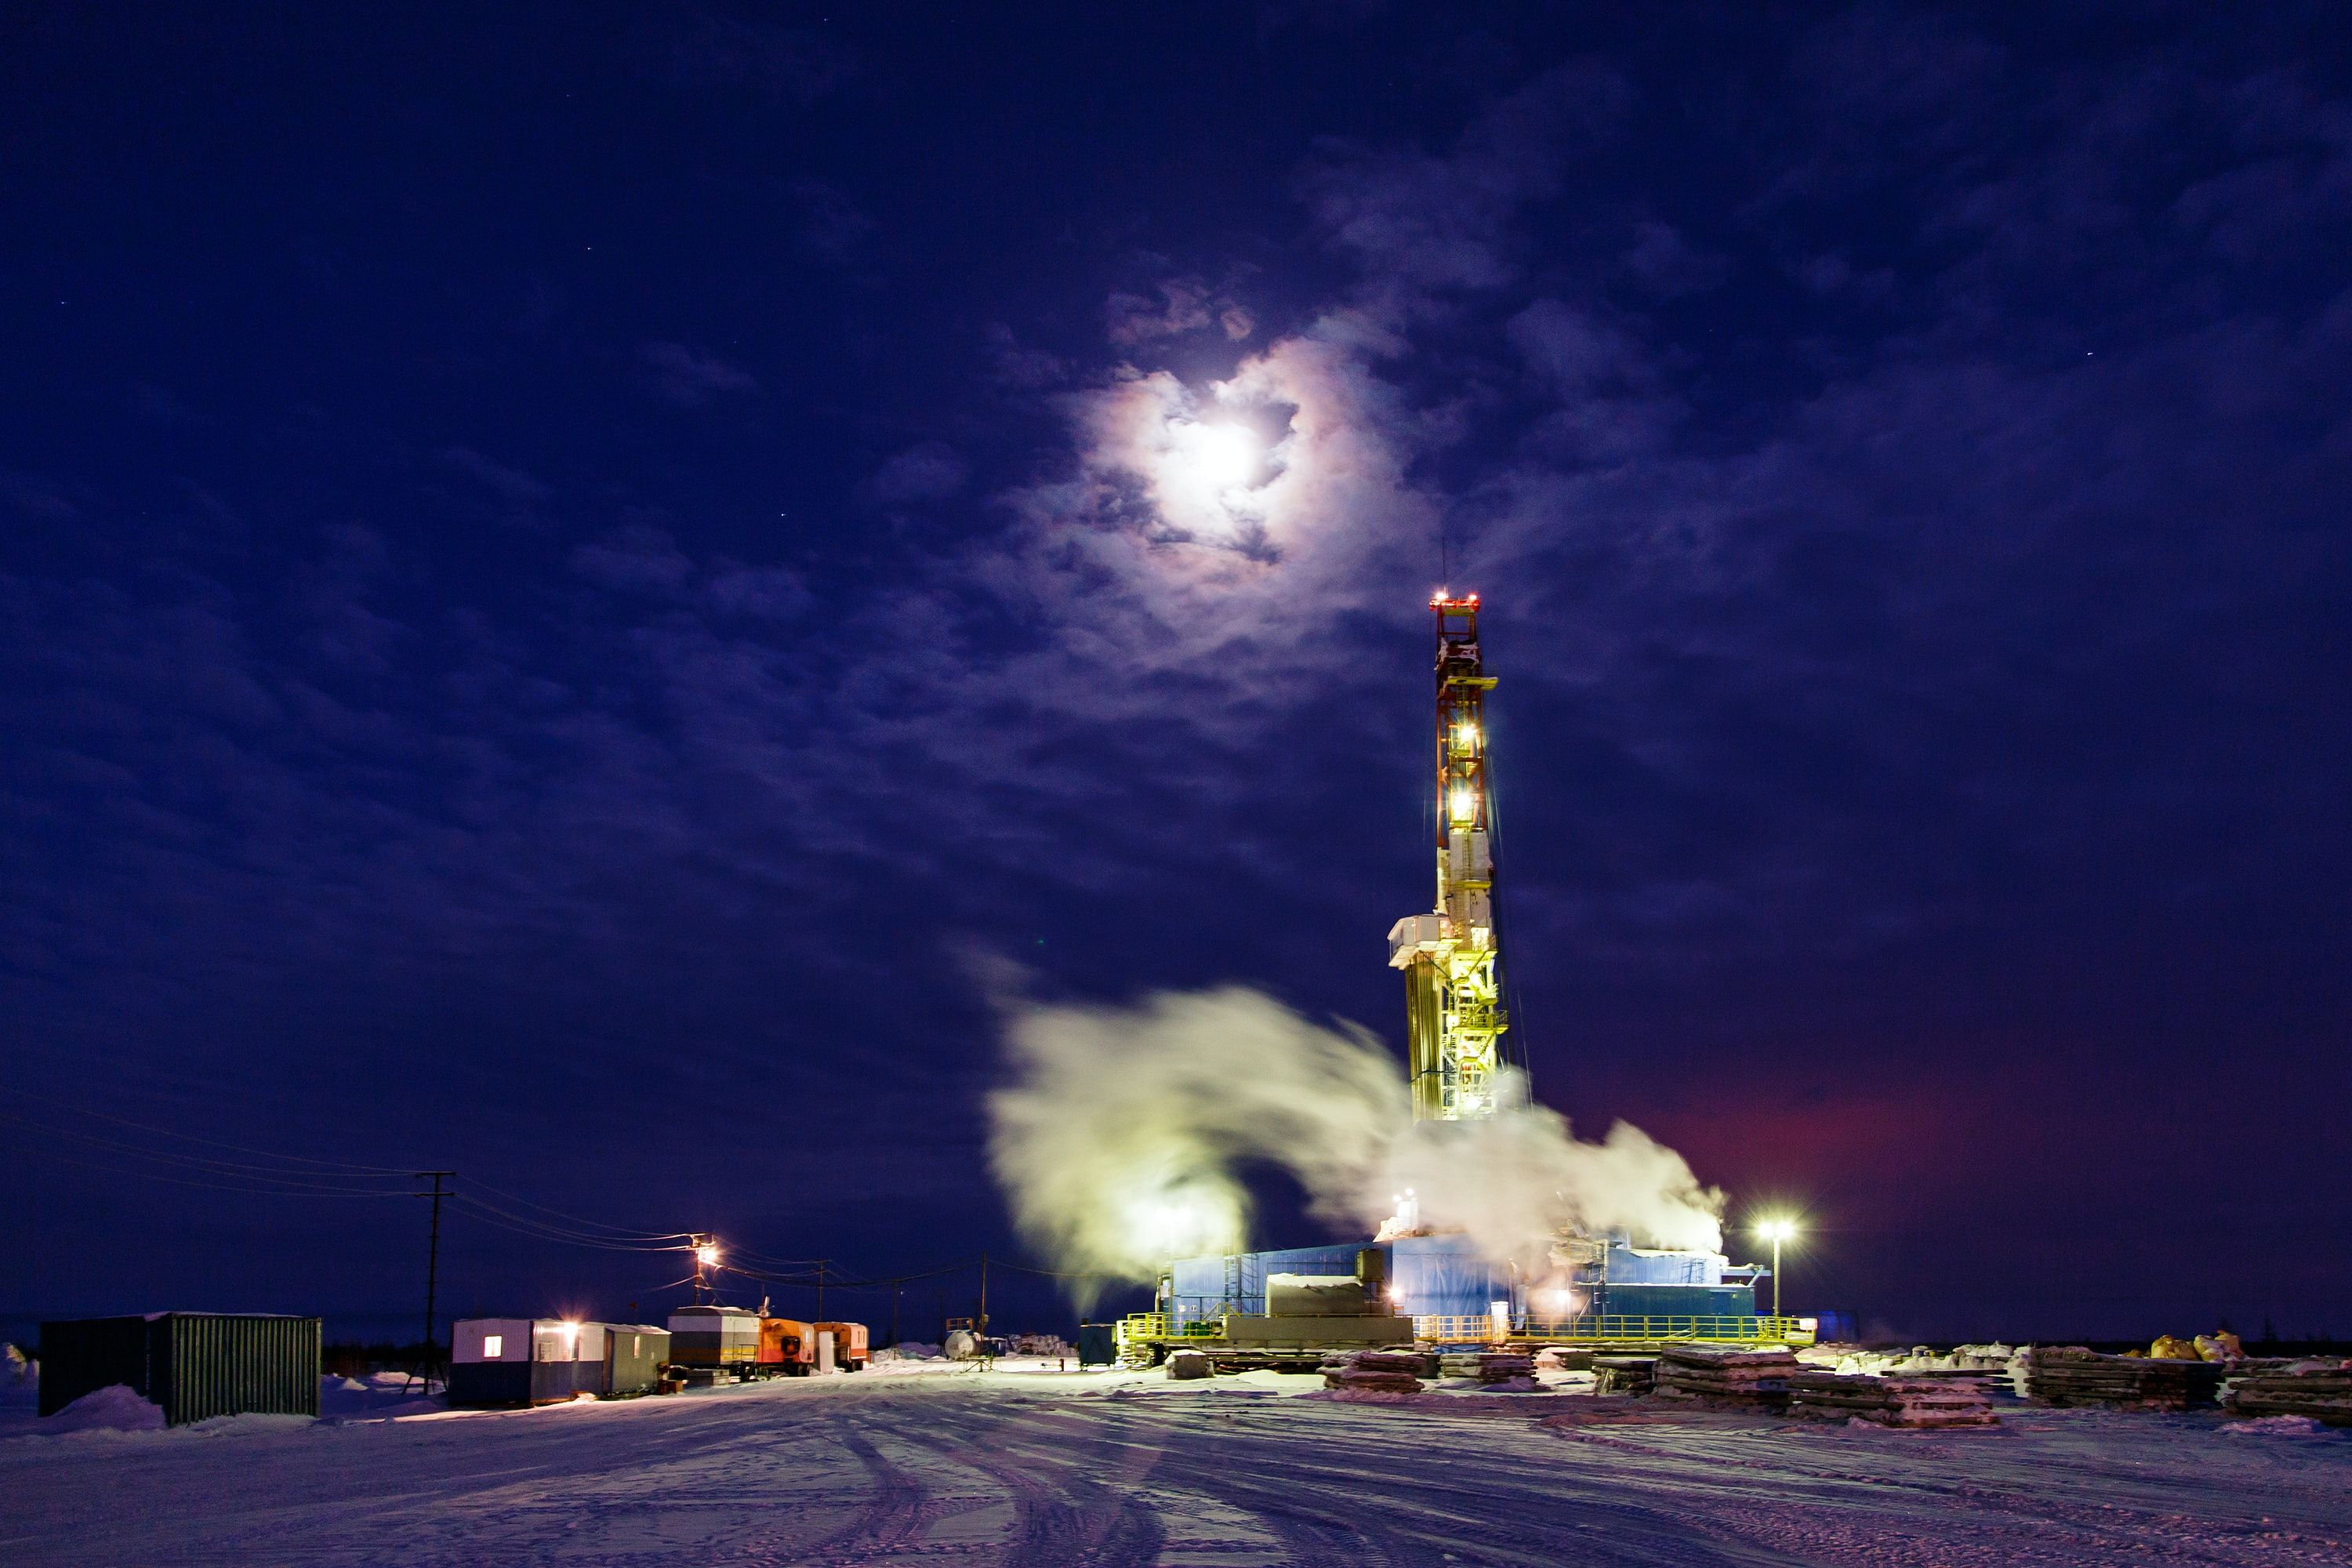 Oil Refinery Picture. Download Free Image